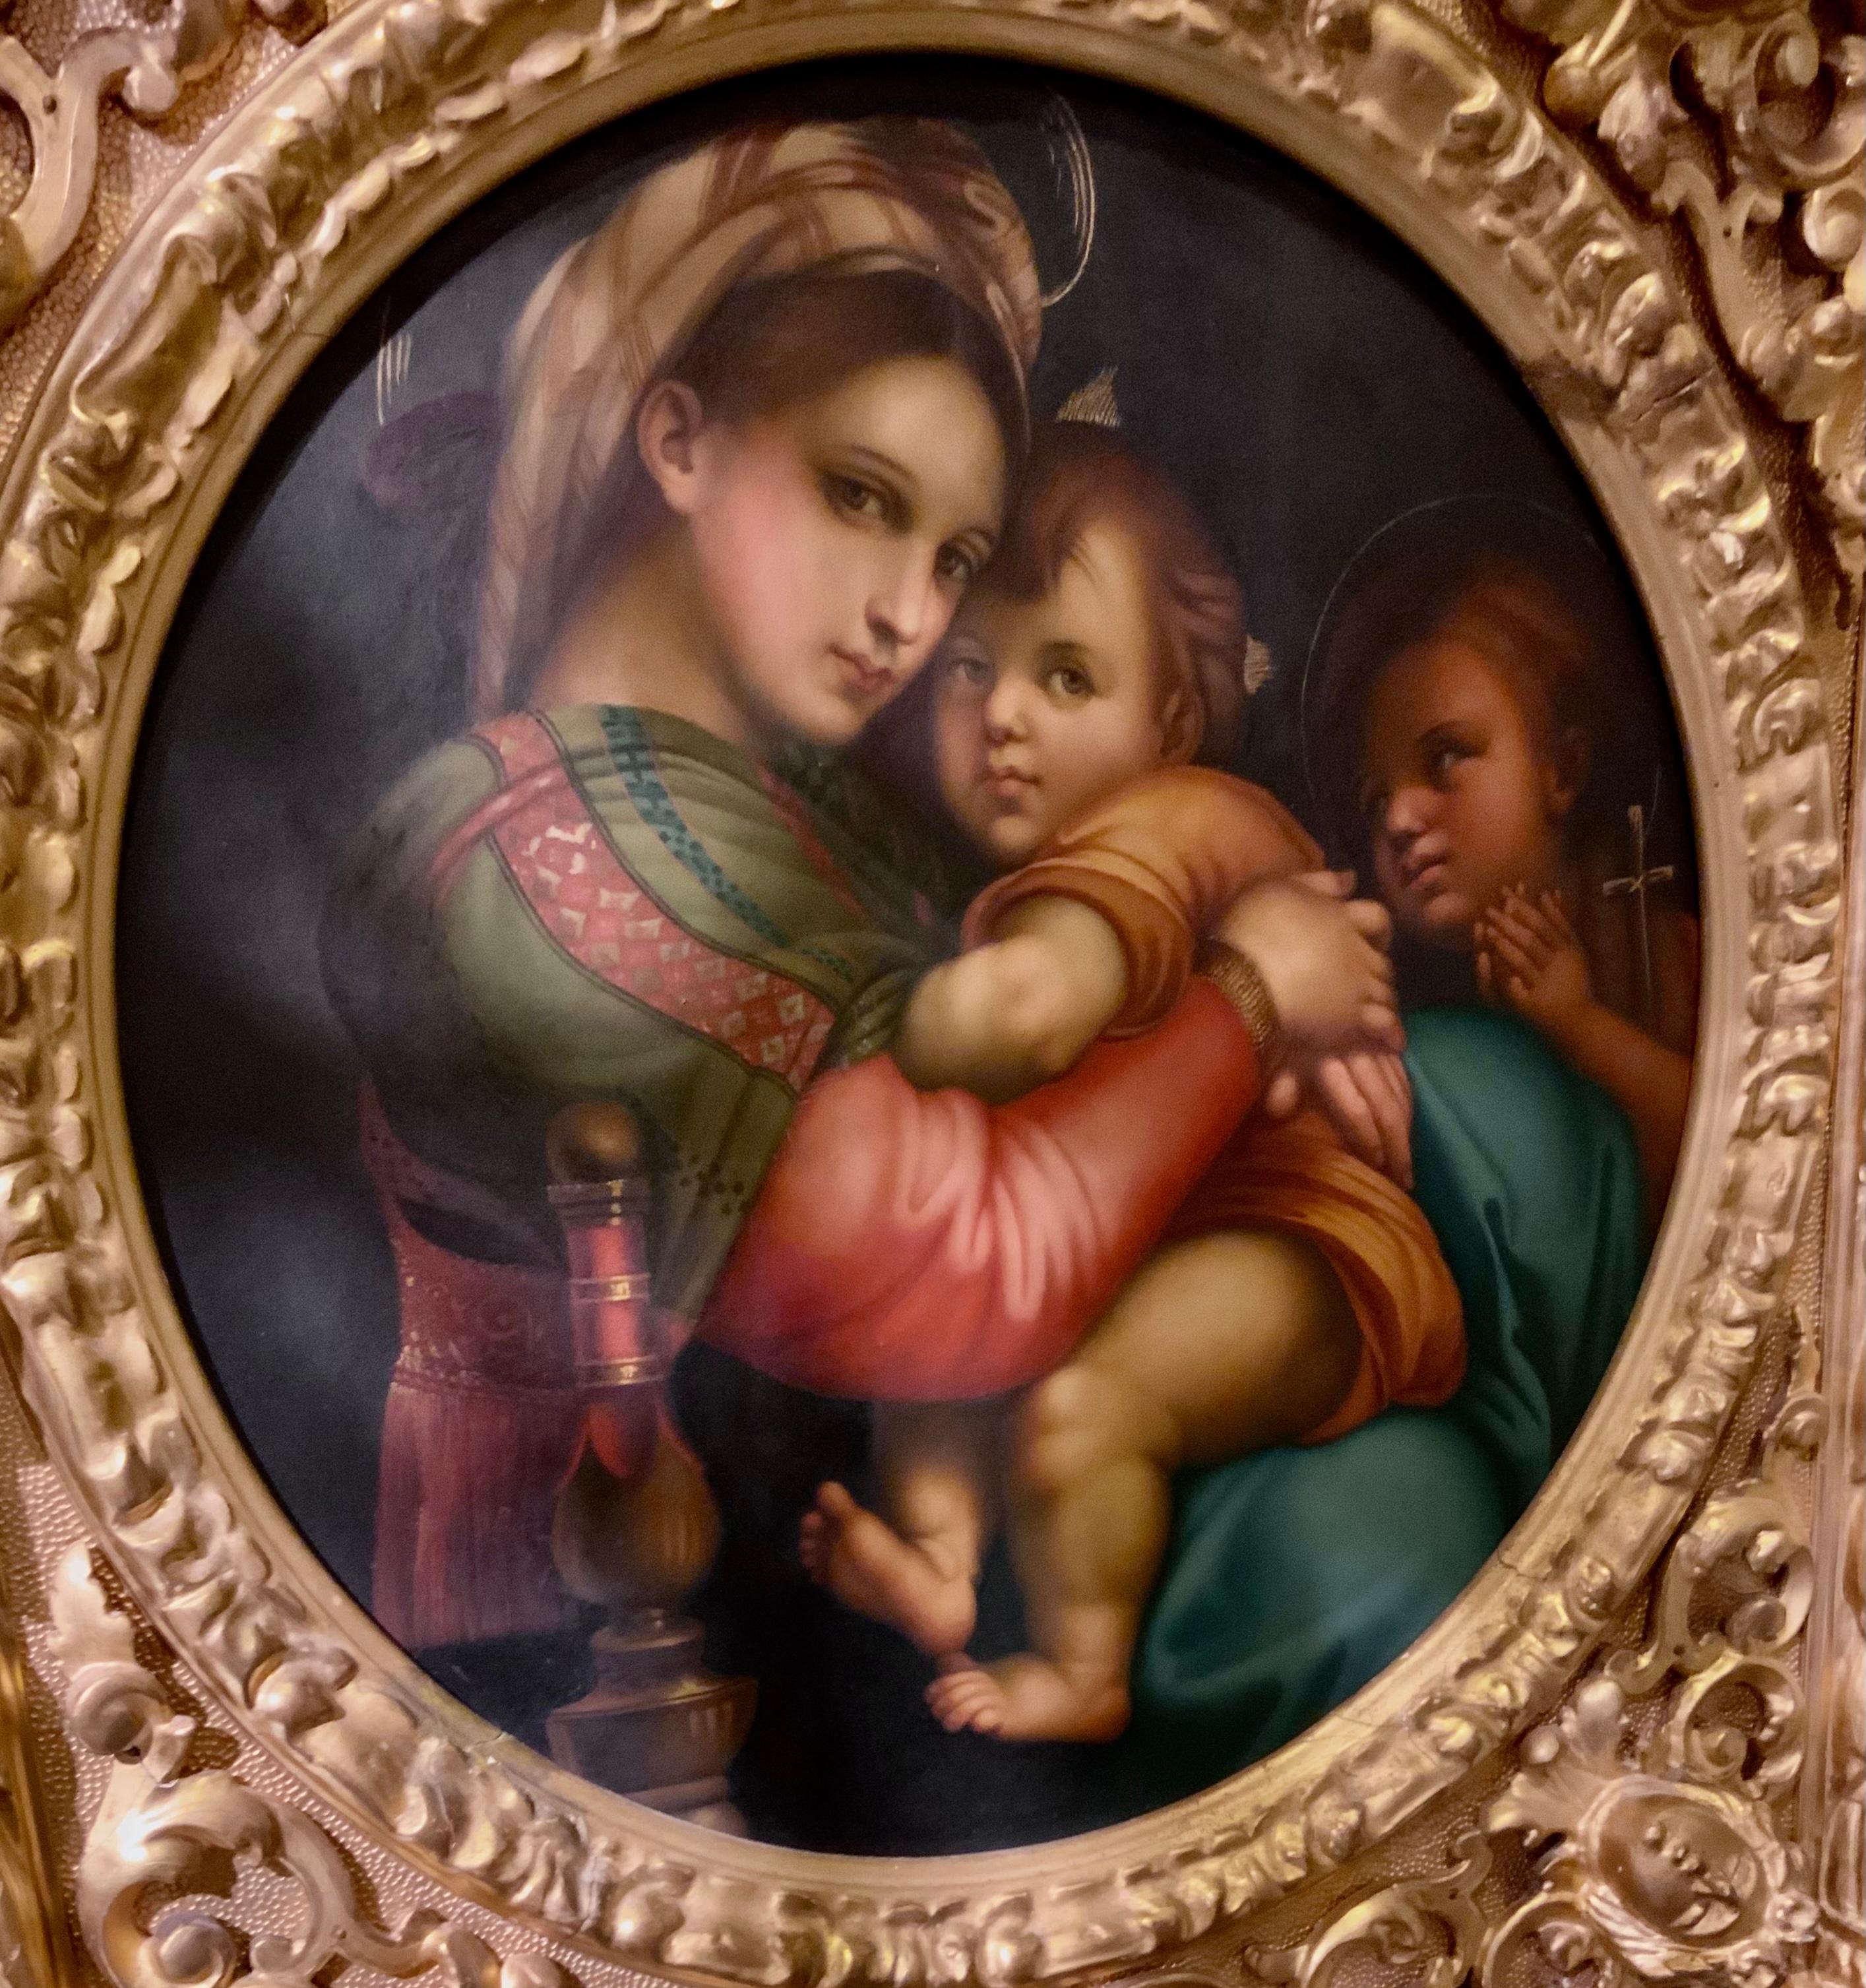 This painting is after Raphael which was one of the greatest artists of the
Italian Renaissance. He was a meteoric success painting altar pieces and
Portraits and receiving commissions from the Pope.. this work is beautiful 
In light and color,